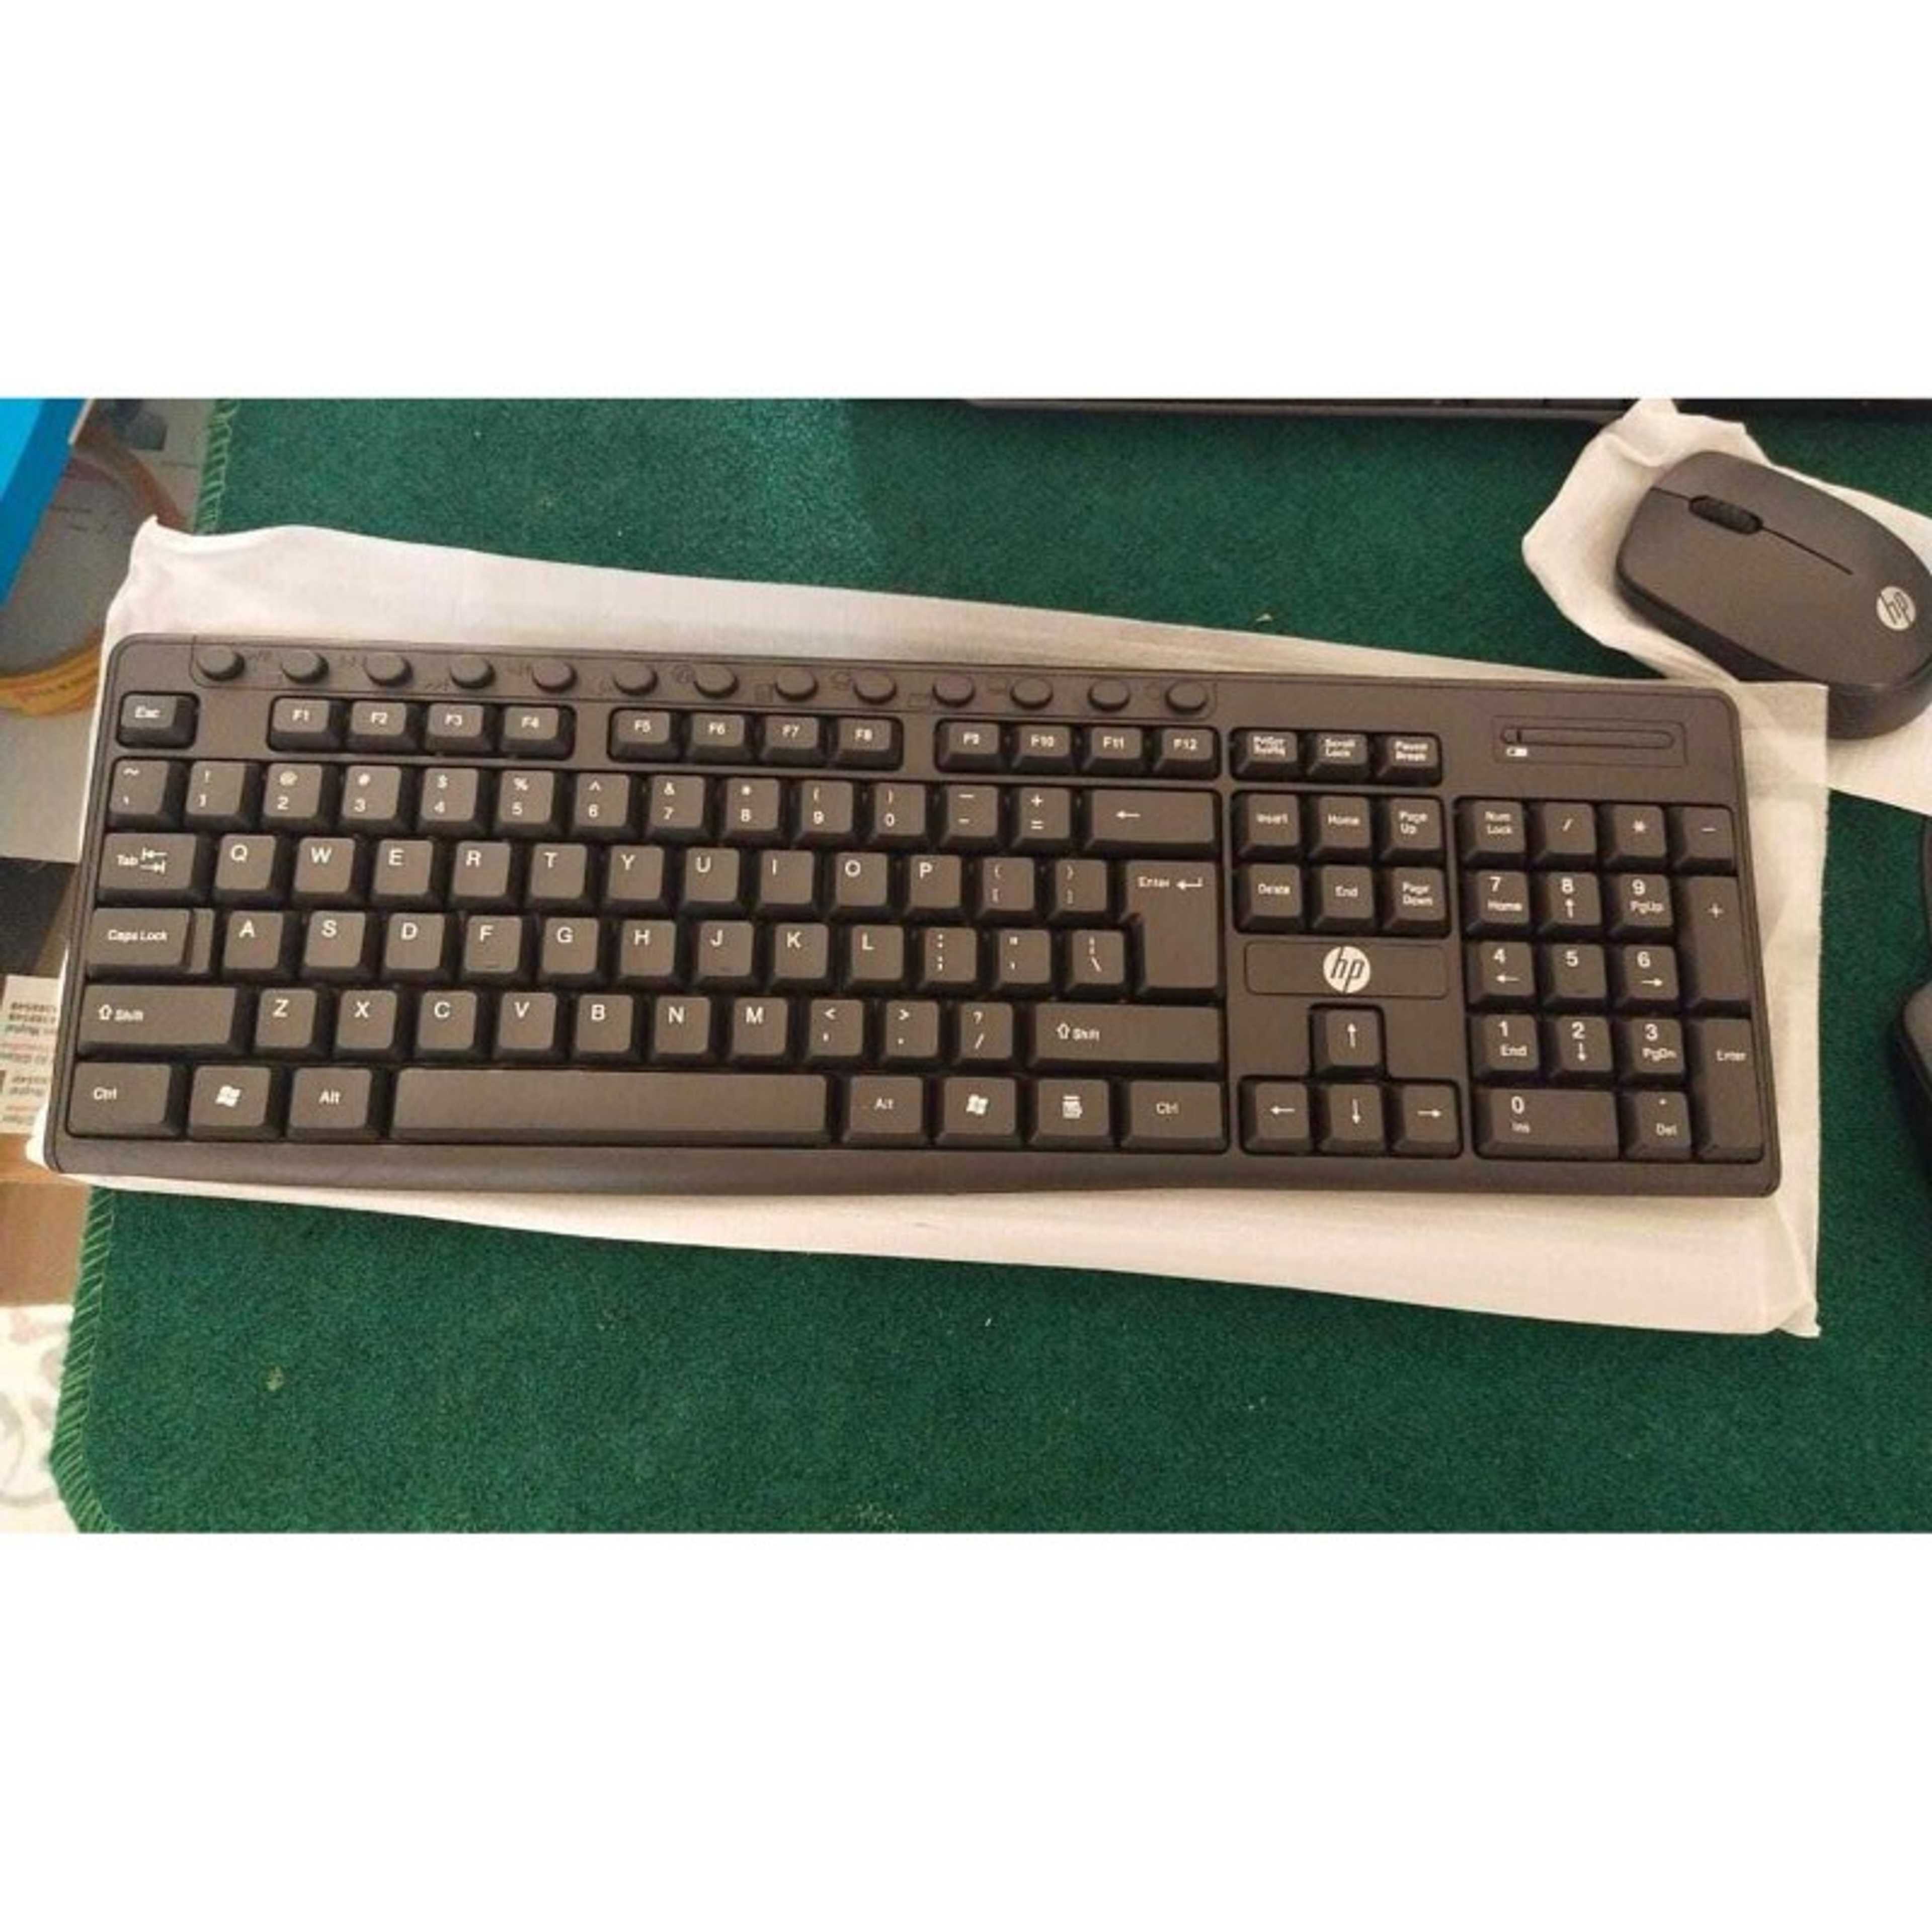 Wireless Keyboard and Mouse Light Weight Keyboard Soft Button best office use Computer Accessories / Keyboards